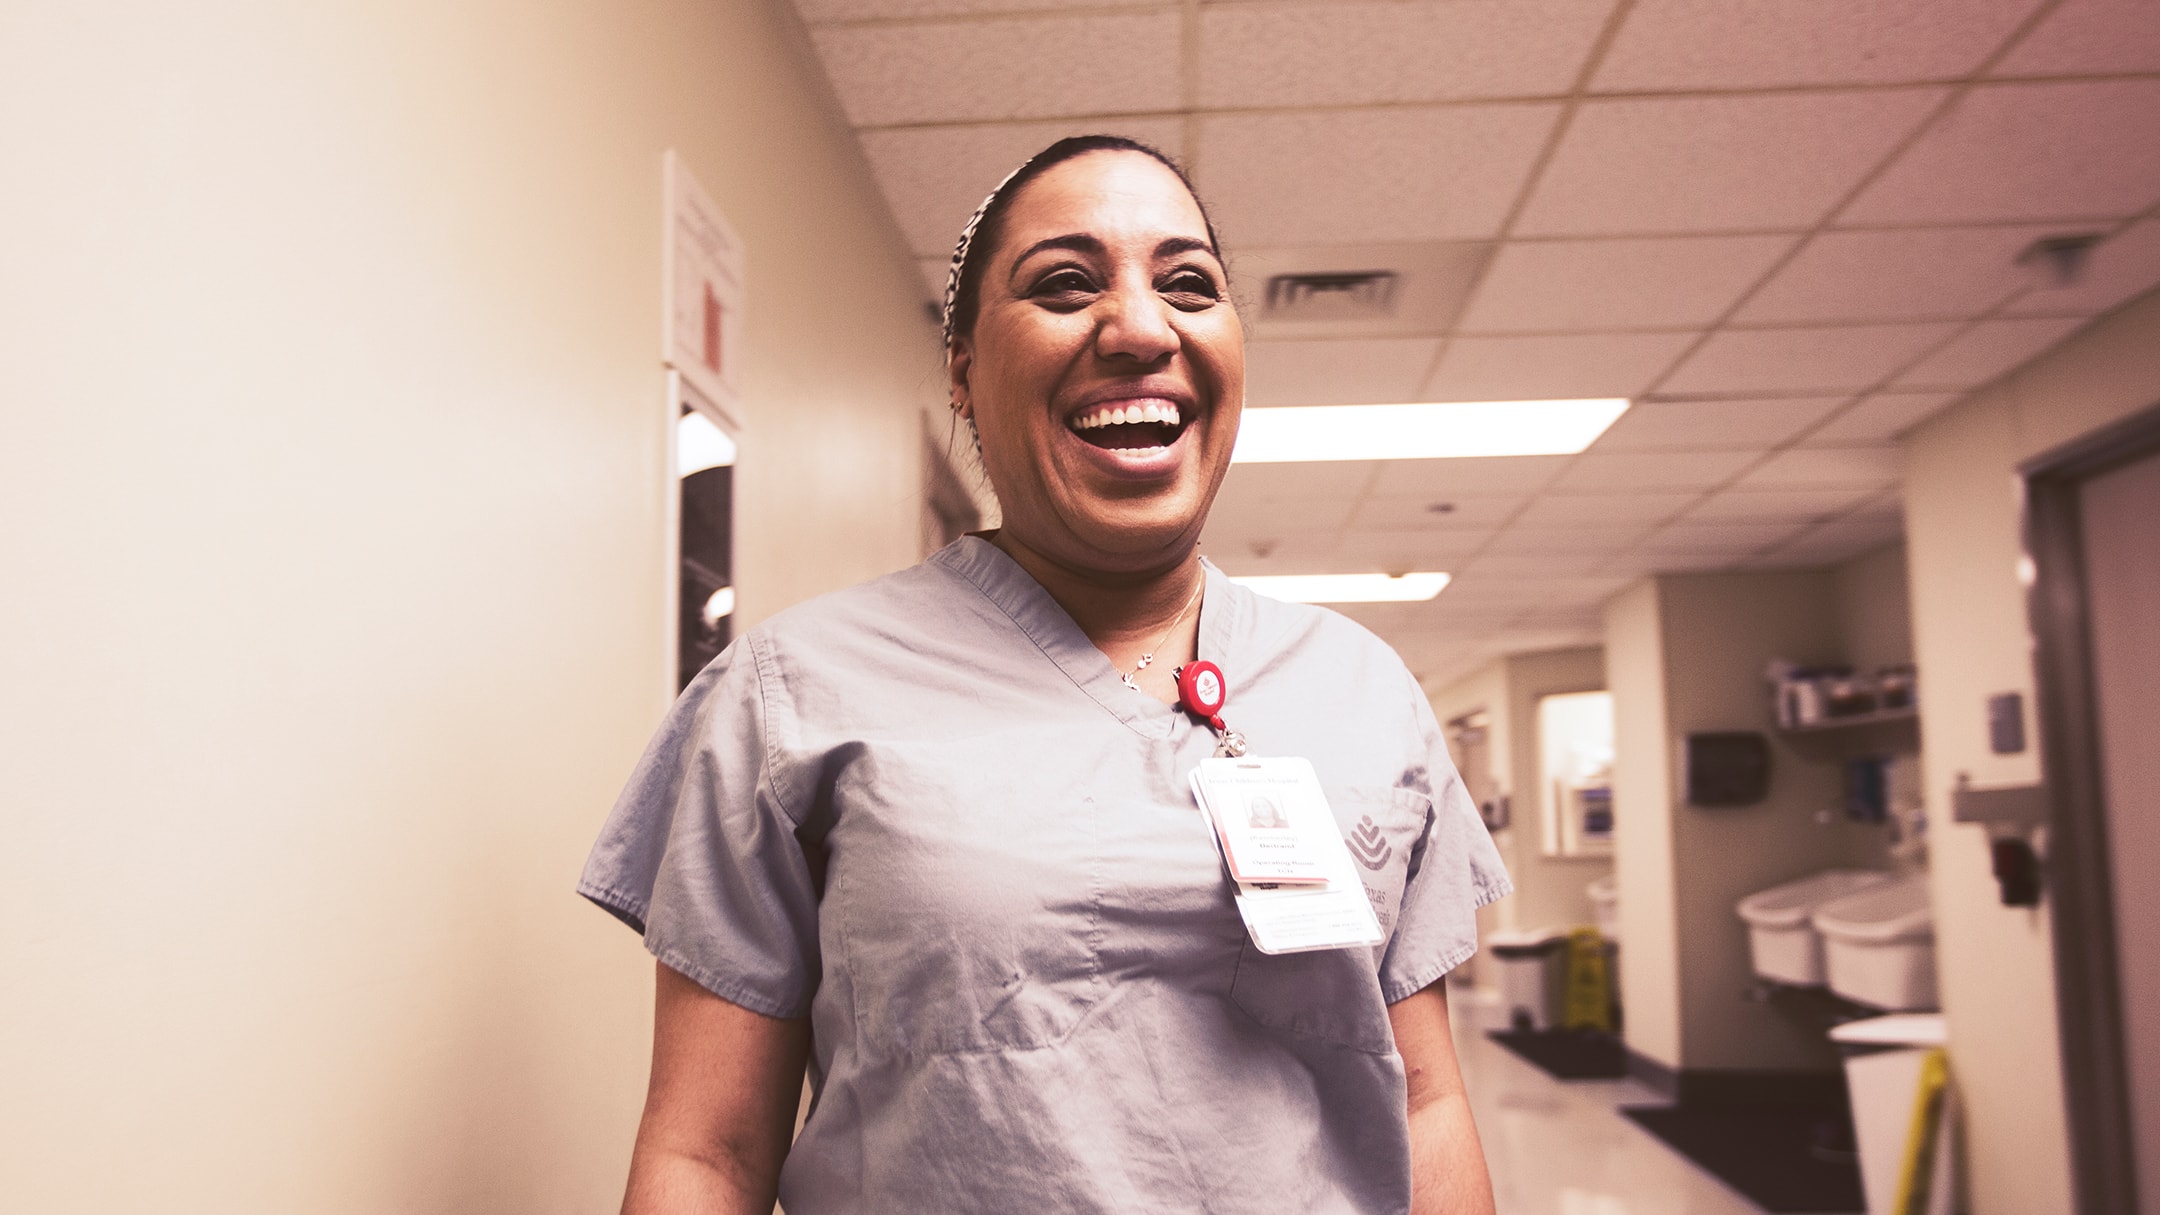 Texas Children’s Hospital nurse smiling excitedly. - Texas Children's Human Resource Campaign and Healthcare marketing initiatives